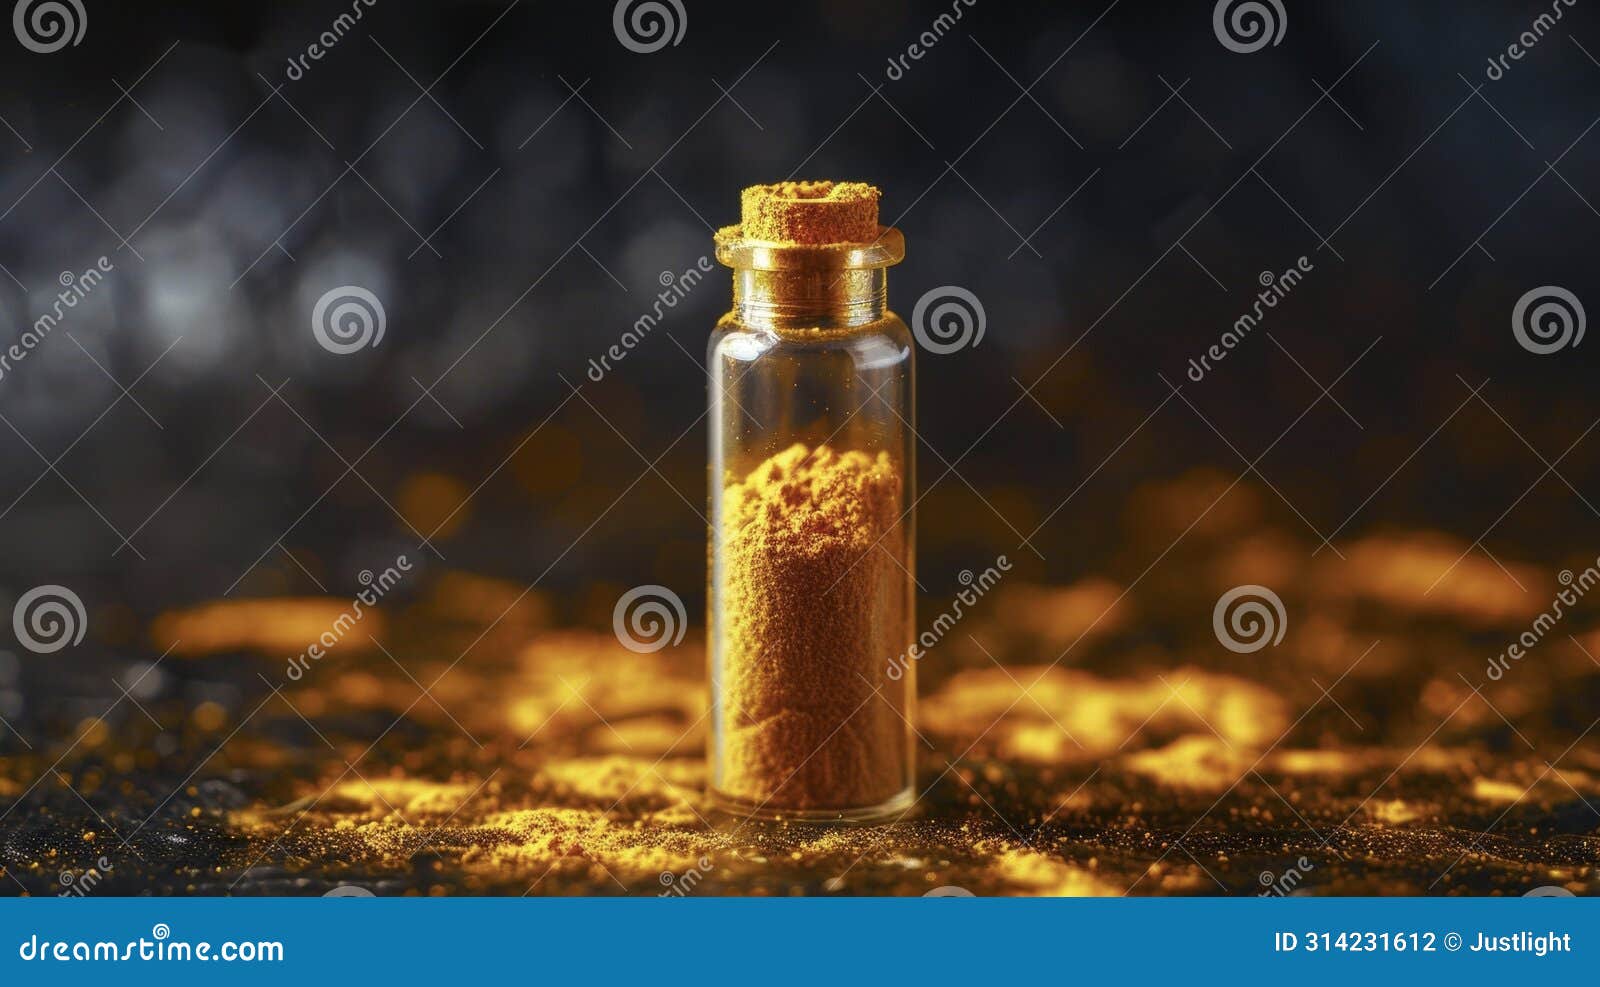 a small vial of bright yellow turmeric powder. turmeric is a powerful antiinflammatory and is often used in herbal